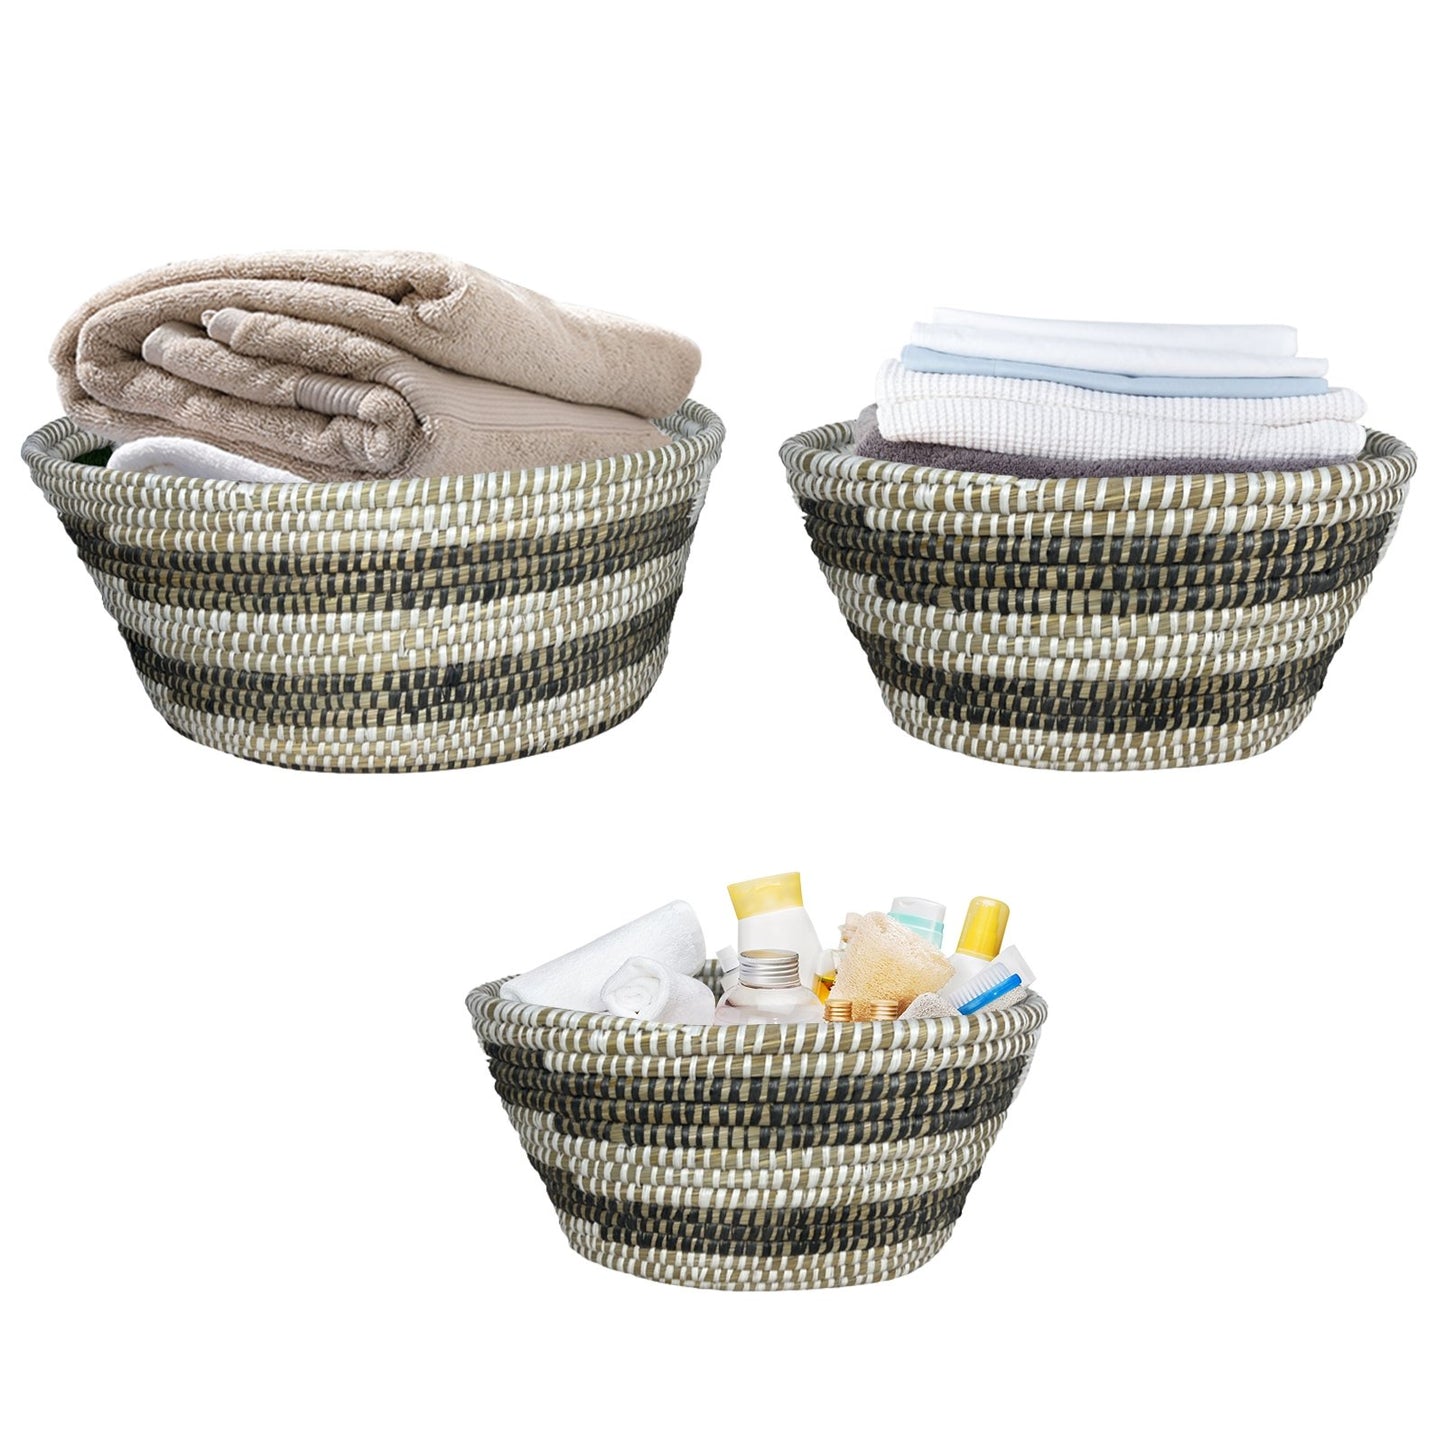 Natural Canes Grass Baskets Stackable Storage Bins Set of 3 with Hollowed Handles - Gallery Canada